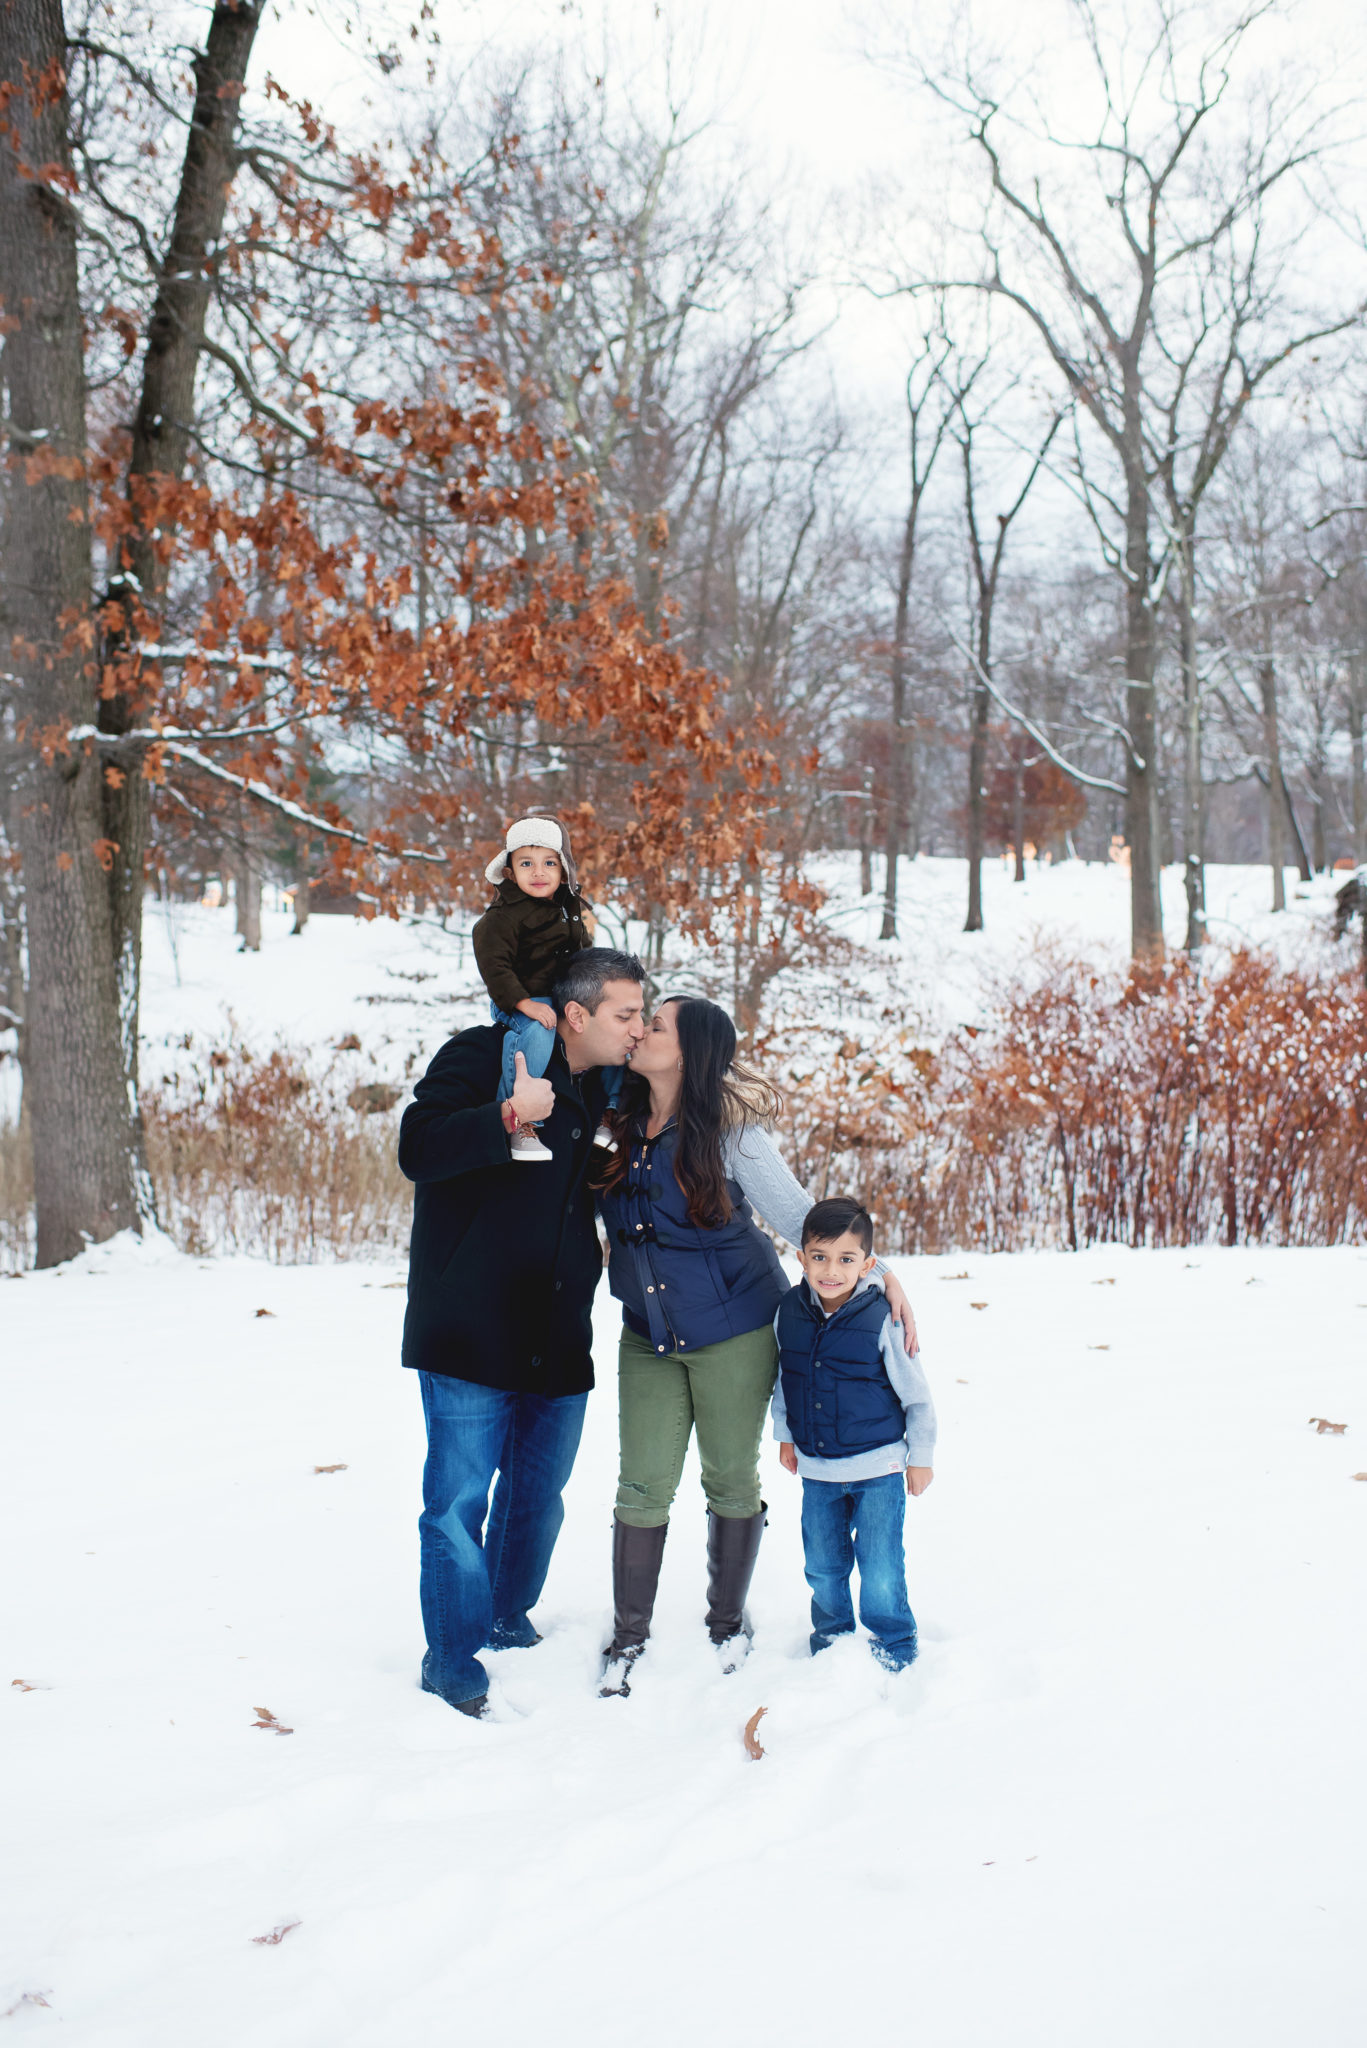 Christmas in the Park Family Mini Sessions Hubbard Park Meriden CT CT Photographer Elizabeth Frederick Photography